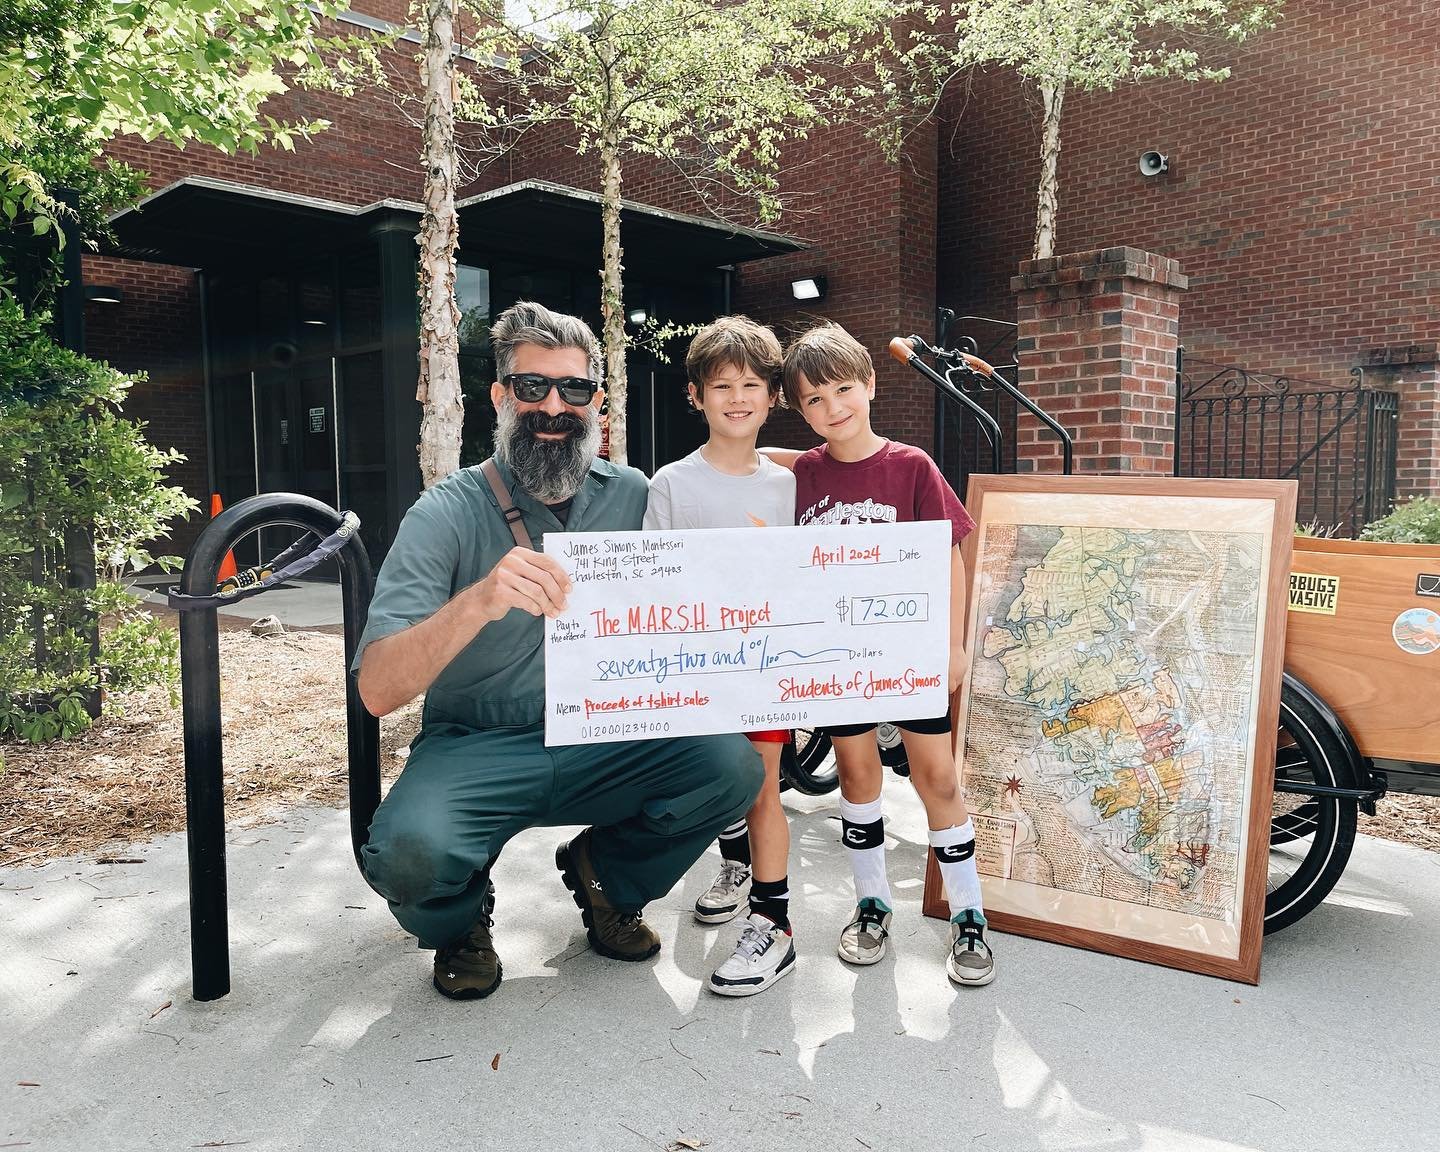 Last weekend we teamed up with @friends.of.james.simons and @keepcharlestonbeautiful to clean up several routes along King and Rutledge from Grove to Huger St! Not only did 113 volunteers show up and clean up 1391 whopping pounds of trash, but the ki